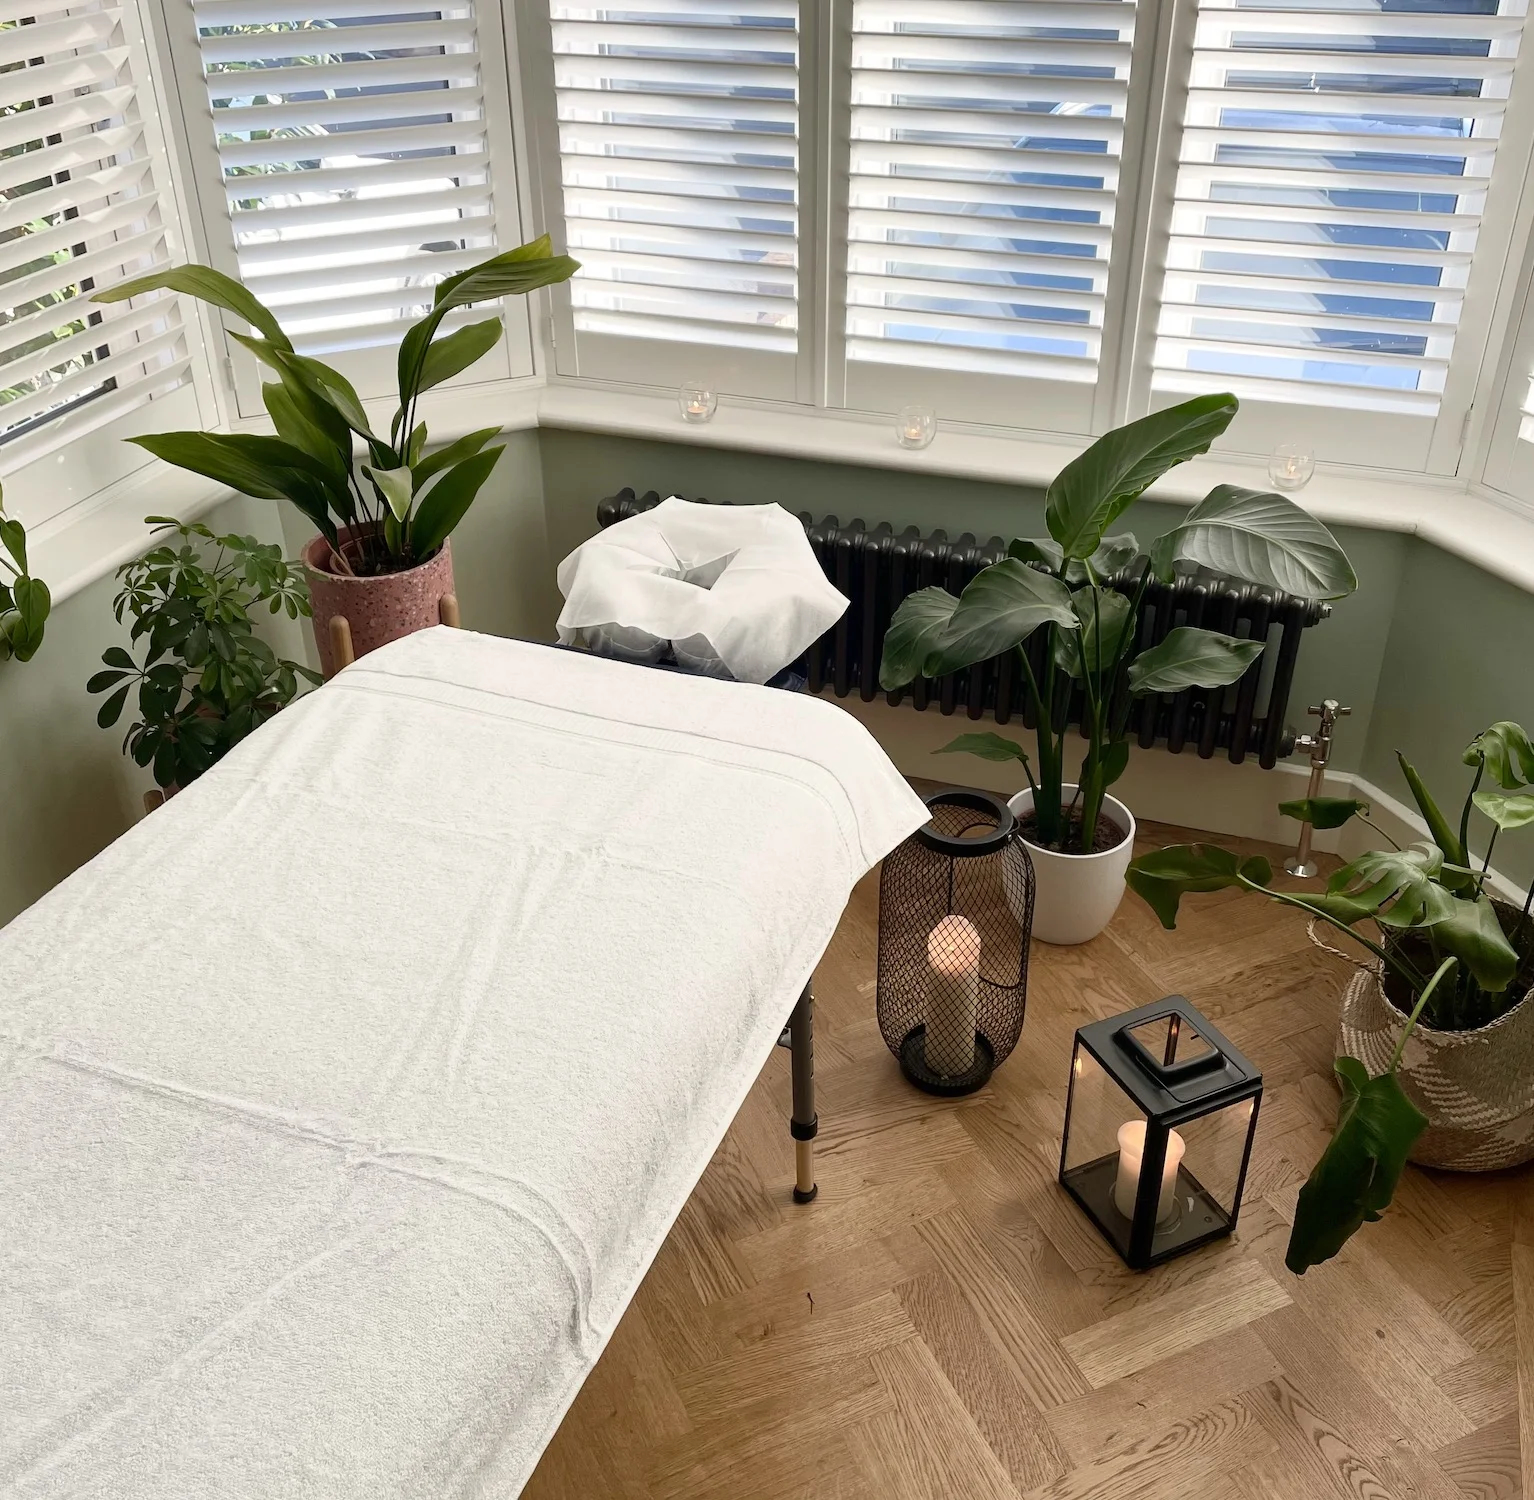 Mobile massage table with towel in apartment window